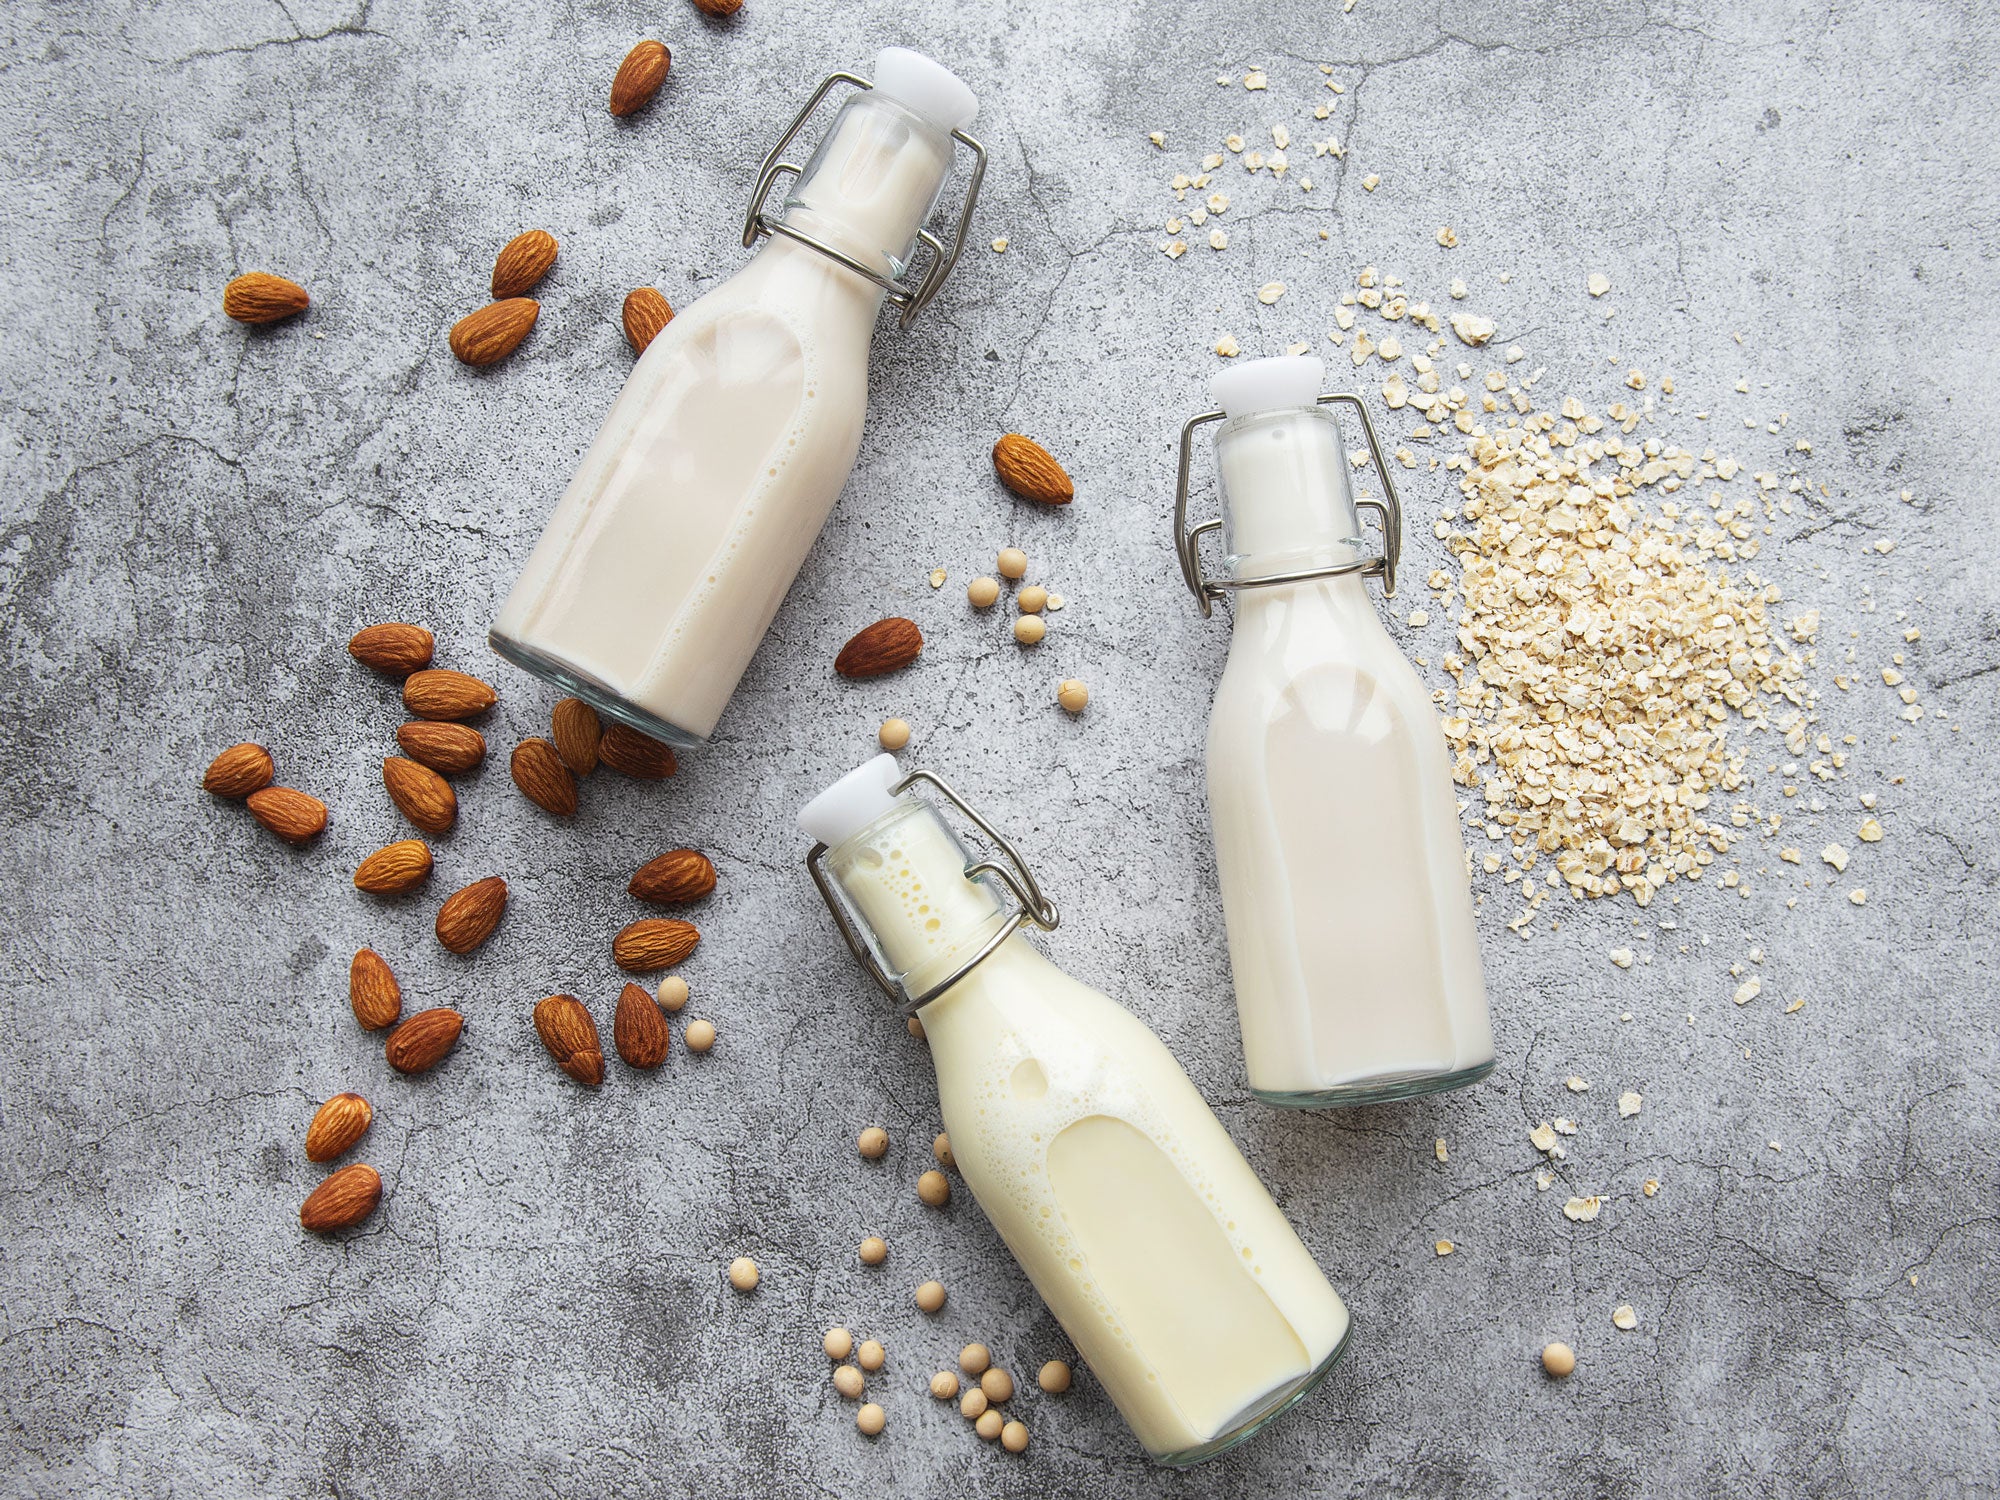 Soy milk or a soy-based drink? All there is to know about plant-based drinks